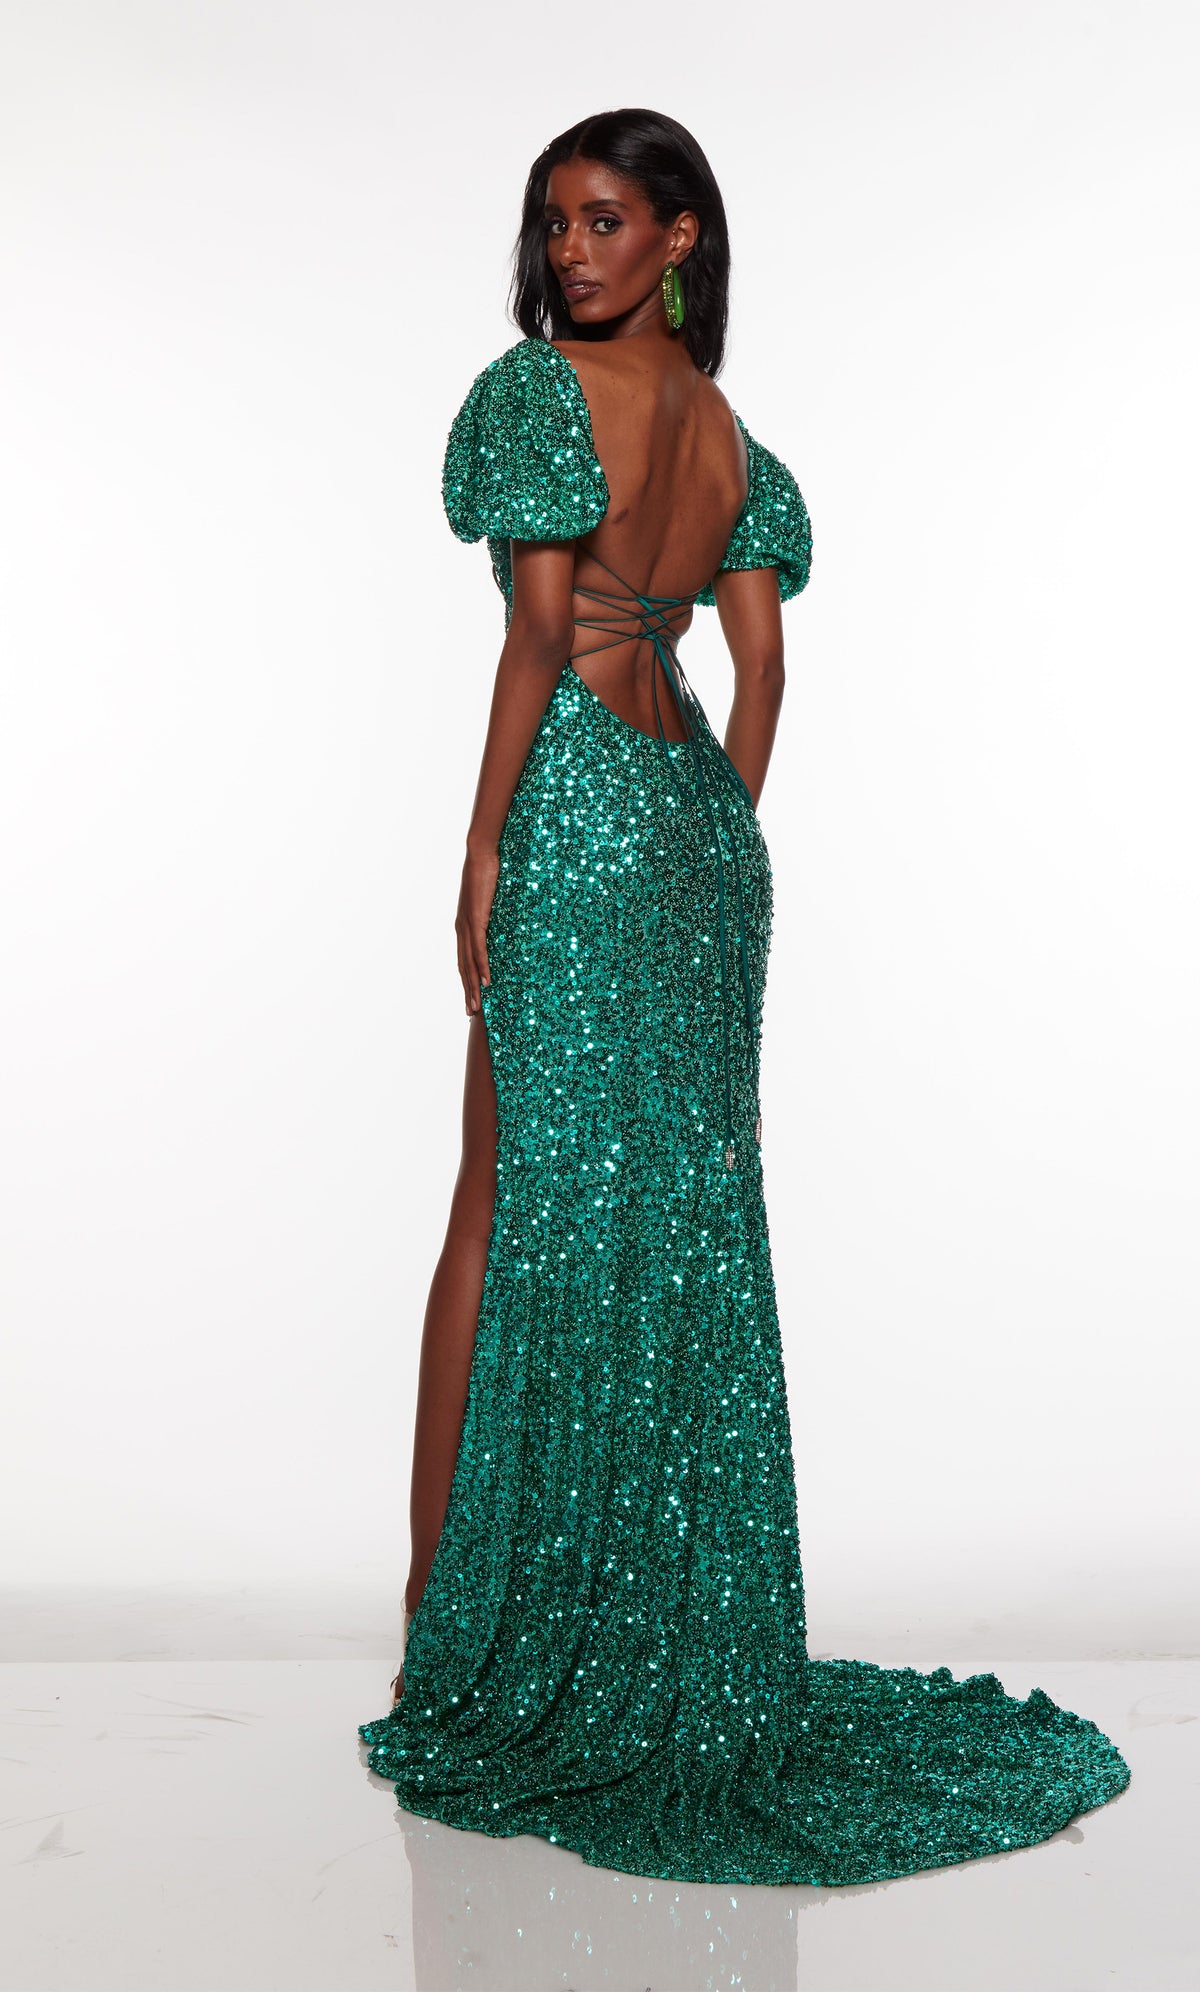 Puff sleeved formal dress with high side slit in green sequins.